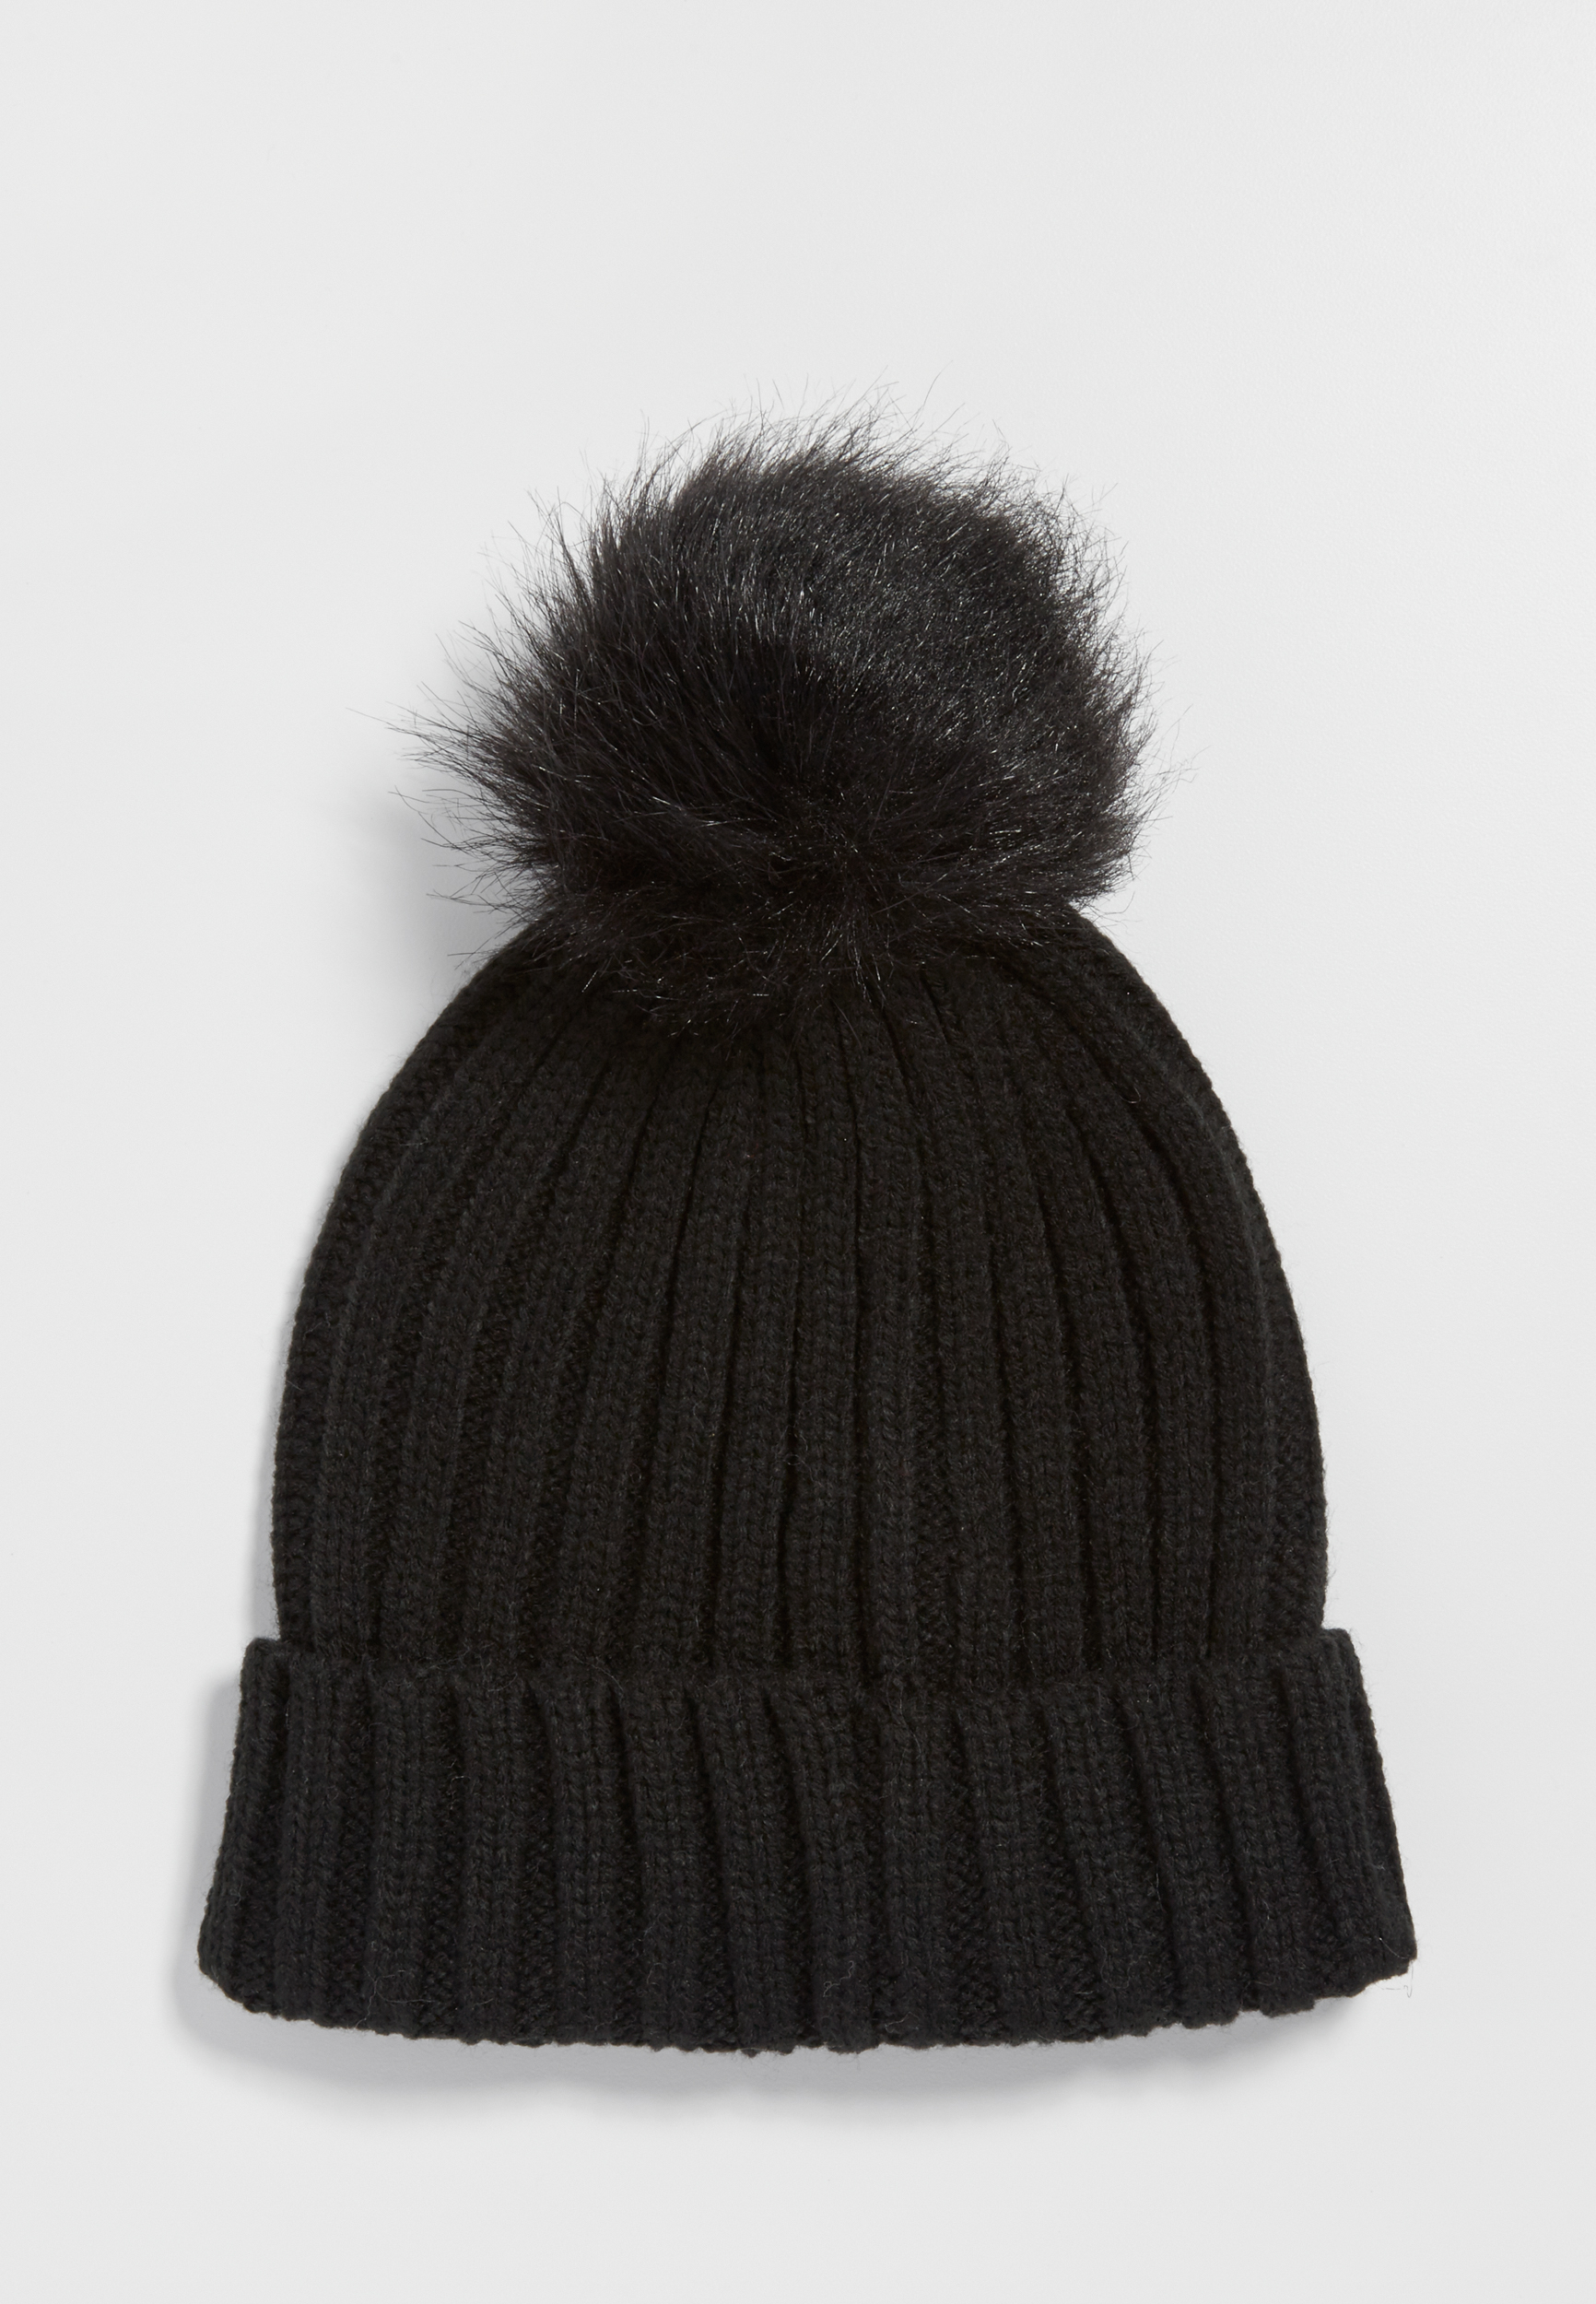 ribbed knit hat with faux fur pompom in black | maurices